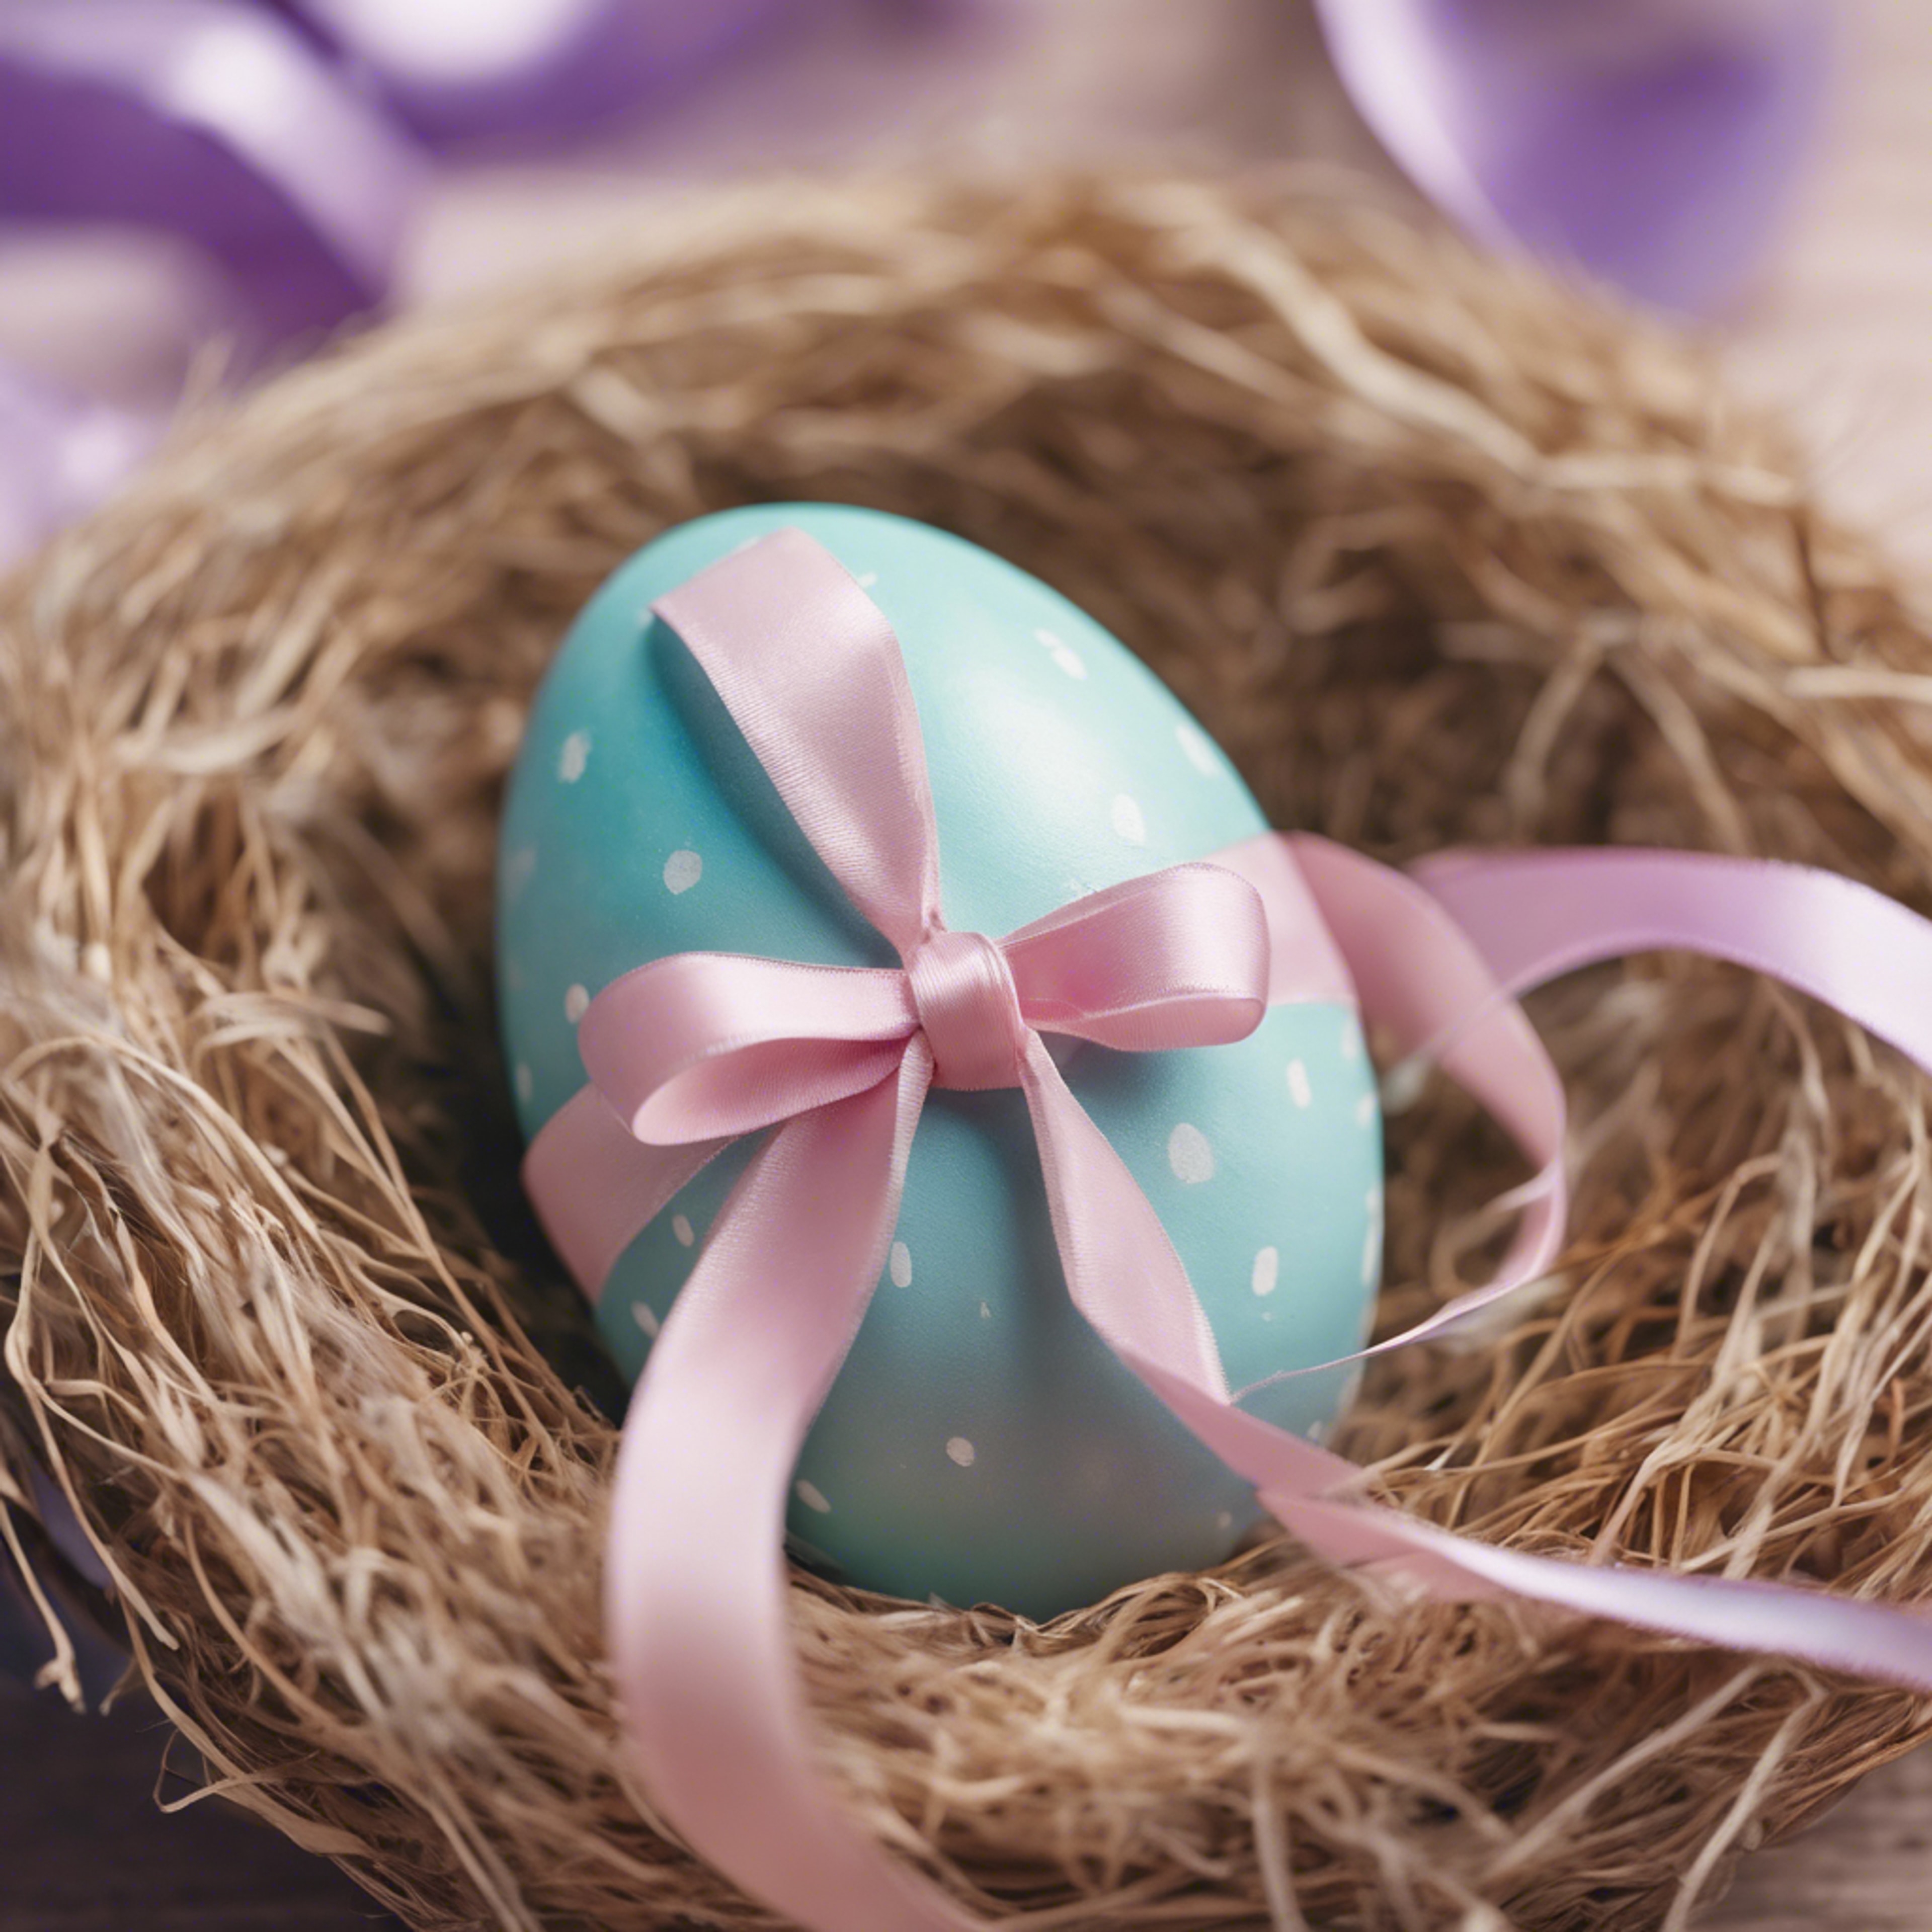 Close-up image of a pastel-colored Easter egg with ribbon details, on a nest. کاغذ دیواری[582f95aee8b94a49b4e5]